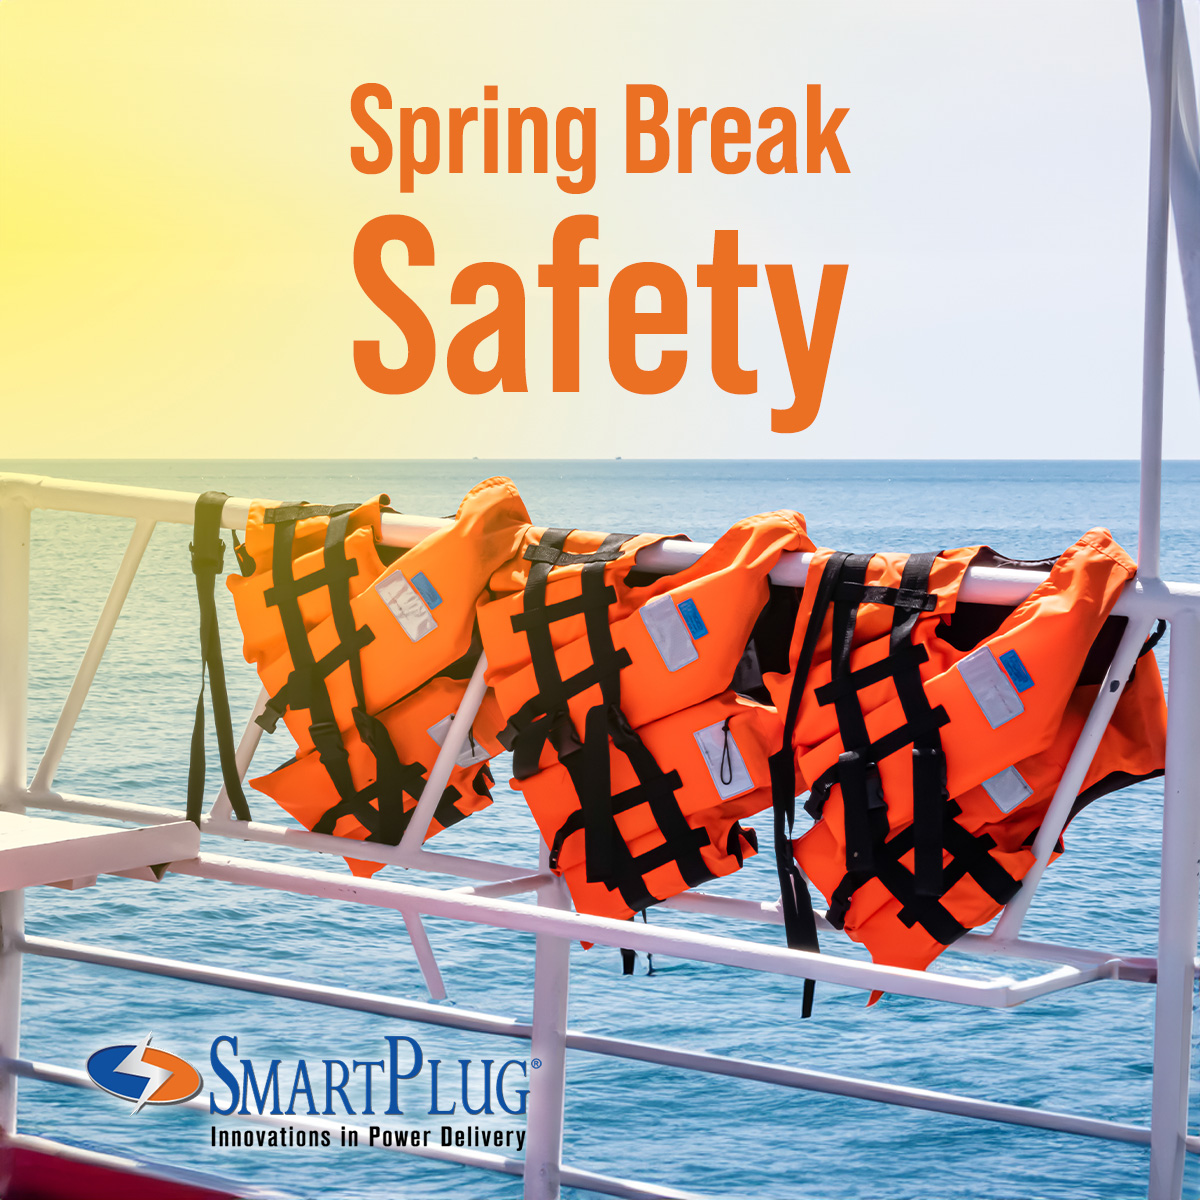 Enjoy safer spring break adventures with our reliable shore power solutions in tow.☀️🌴  What are YOUR travel plans? Comment below!  

#SpringBreakSafety #SpringBreak #SmartPlug #BoatSafety #BoatAccessories #RVSafety #RVAccessories